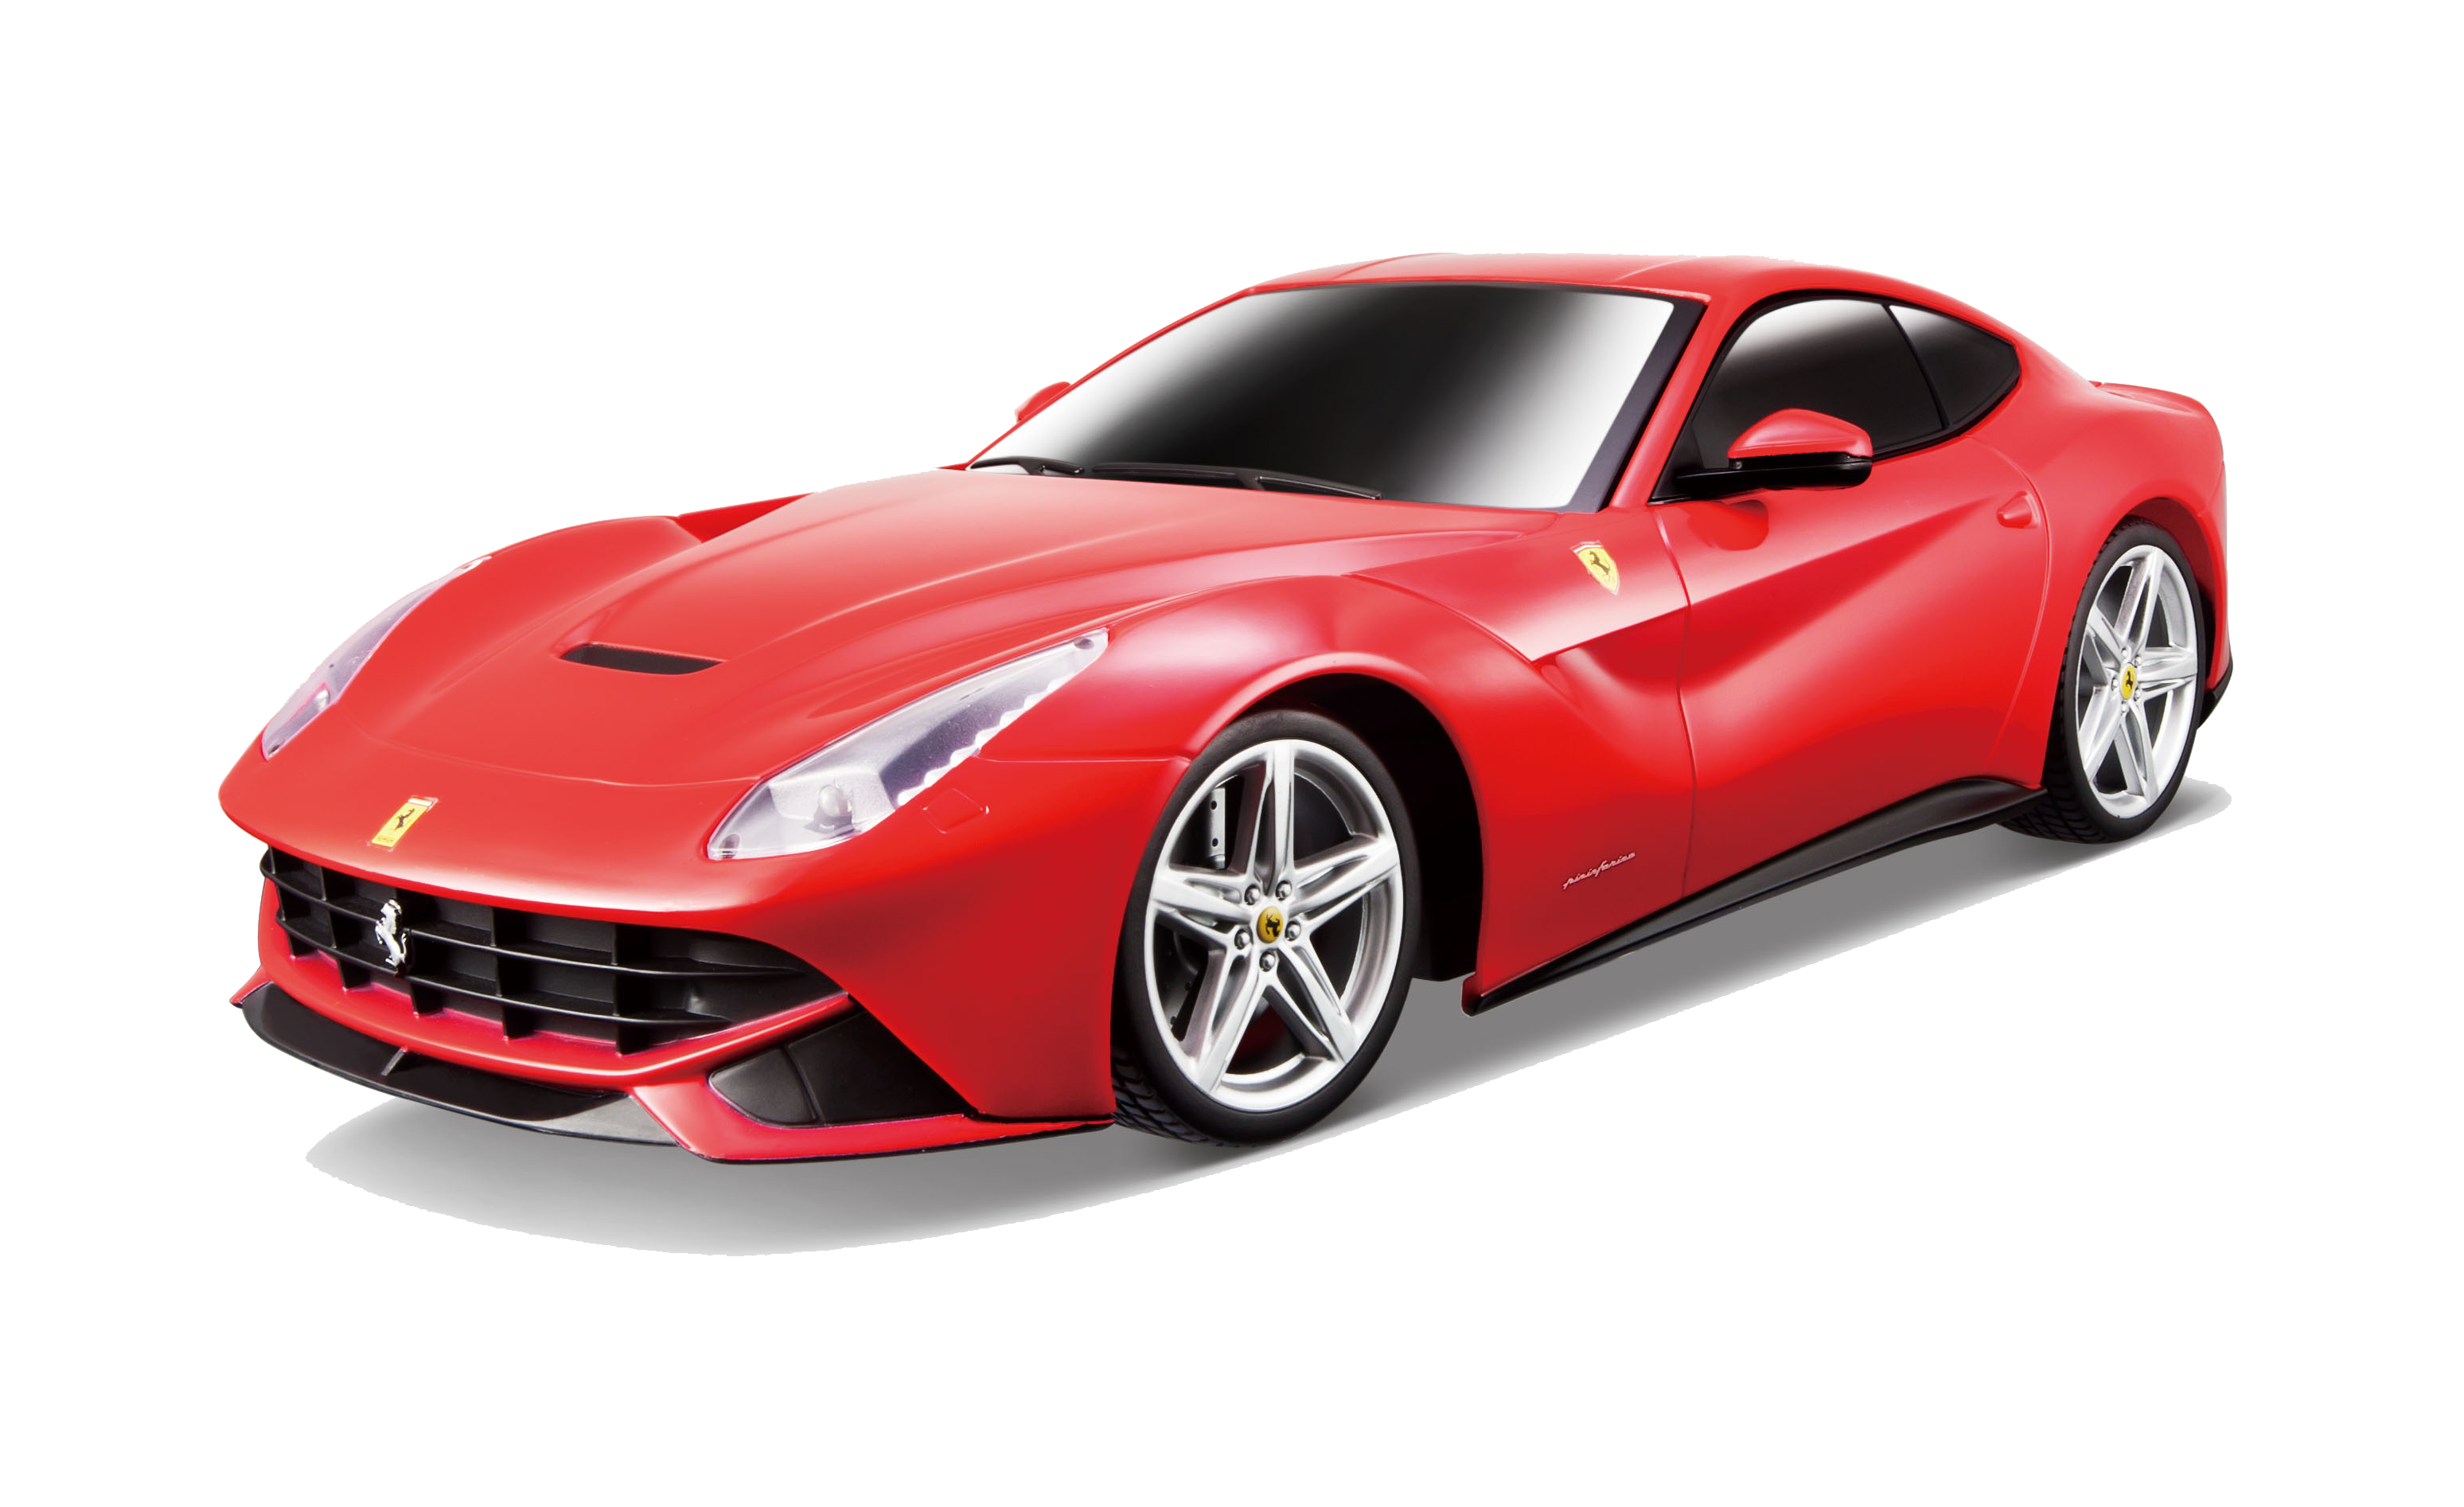 0 Result Images of Ferrari F1 2022 Png - PNG Image Collection